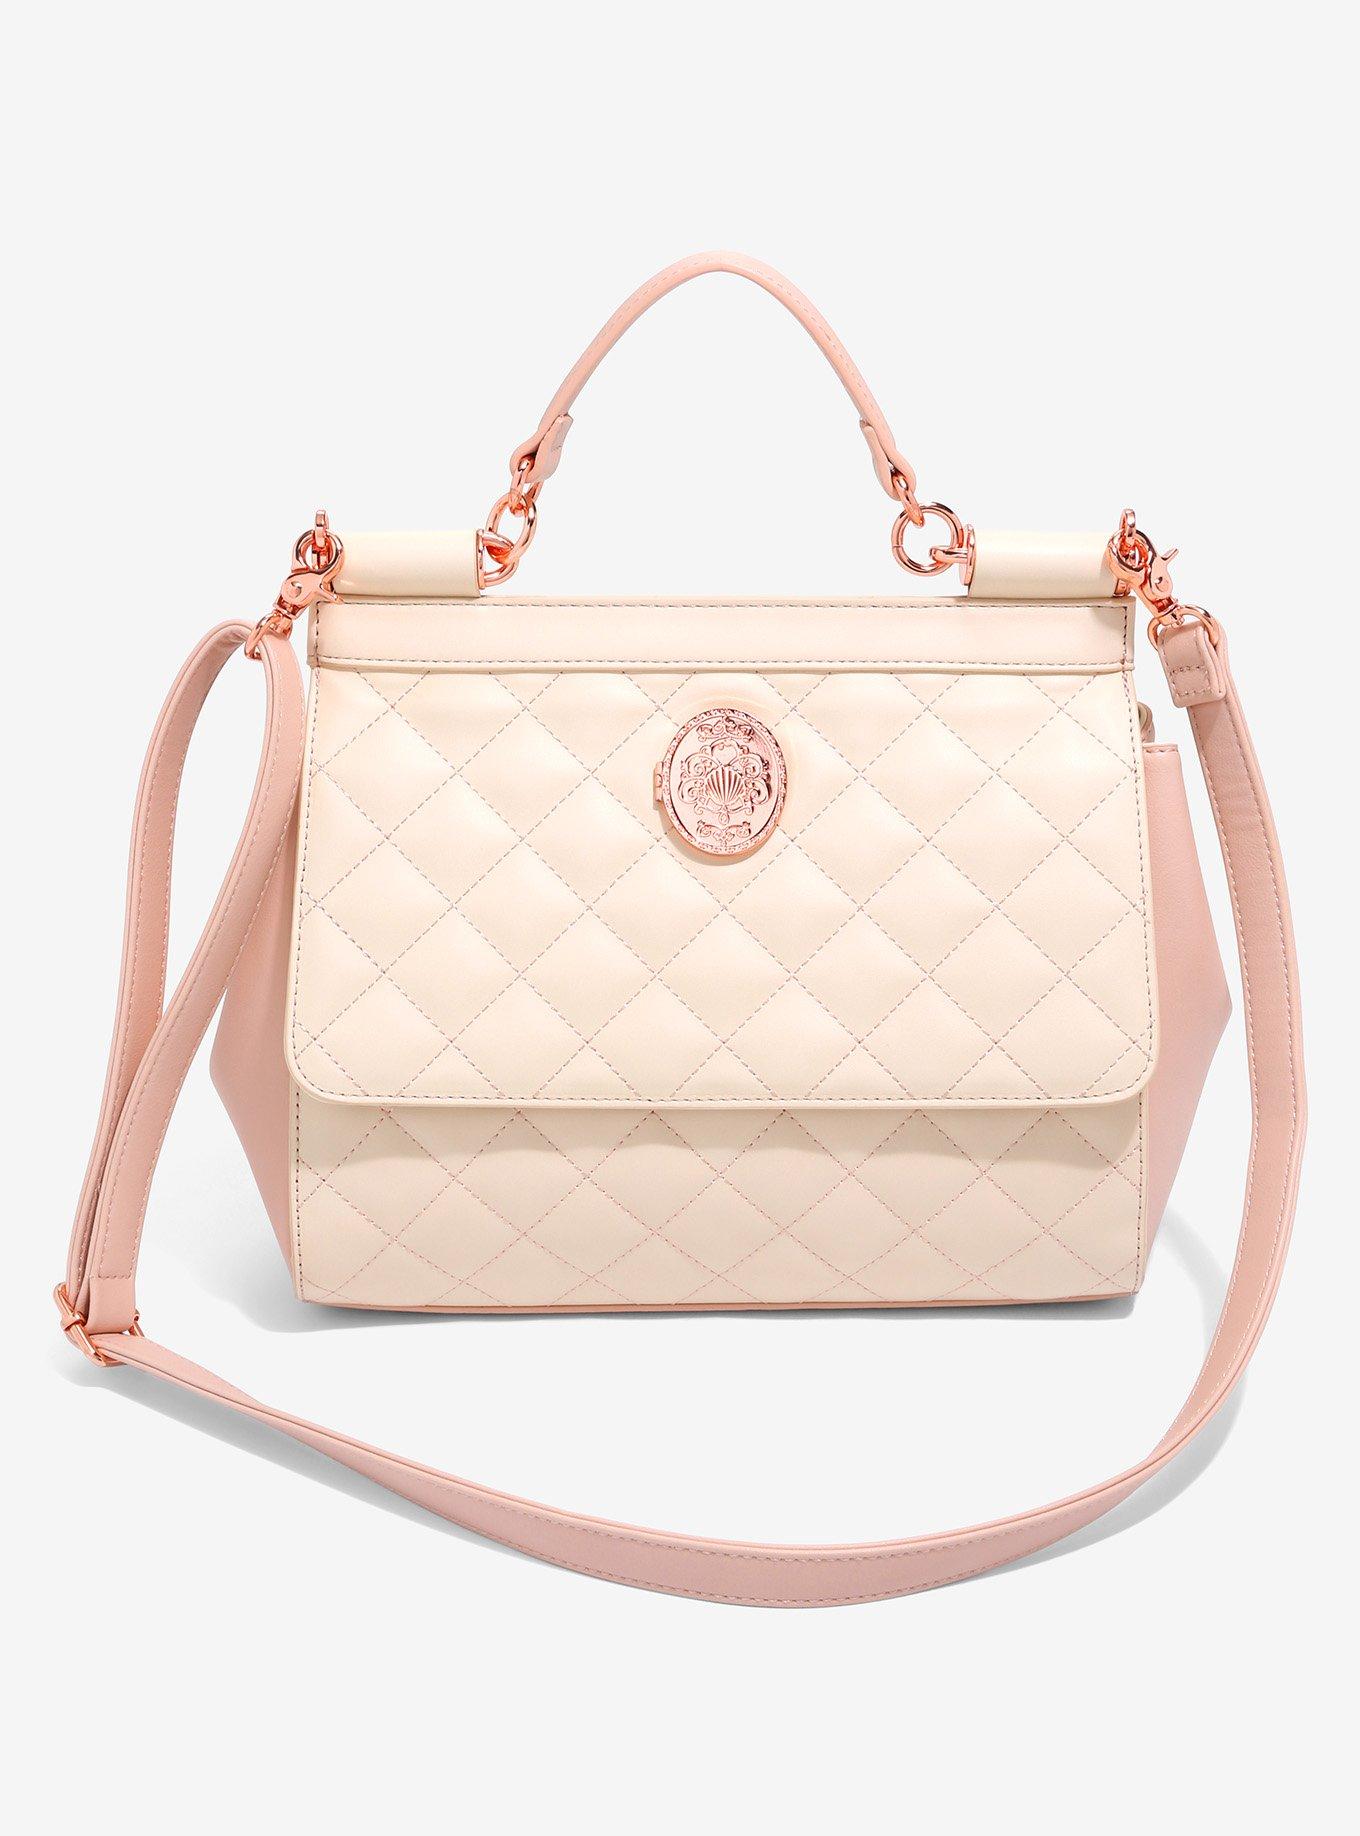 Buy A Chanel Bag and Earn 70% Profit! Is It Worth It?